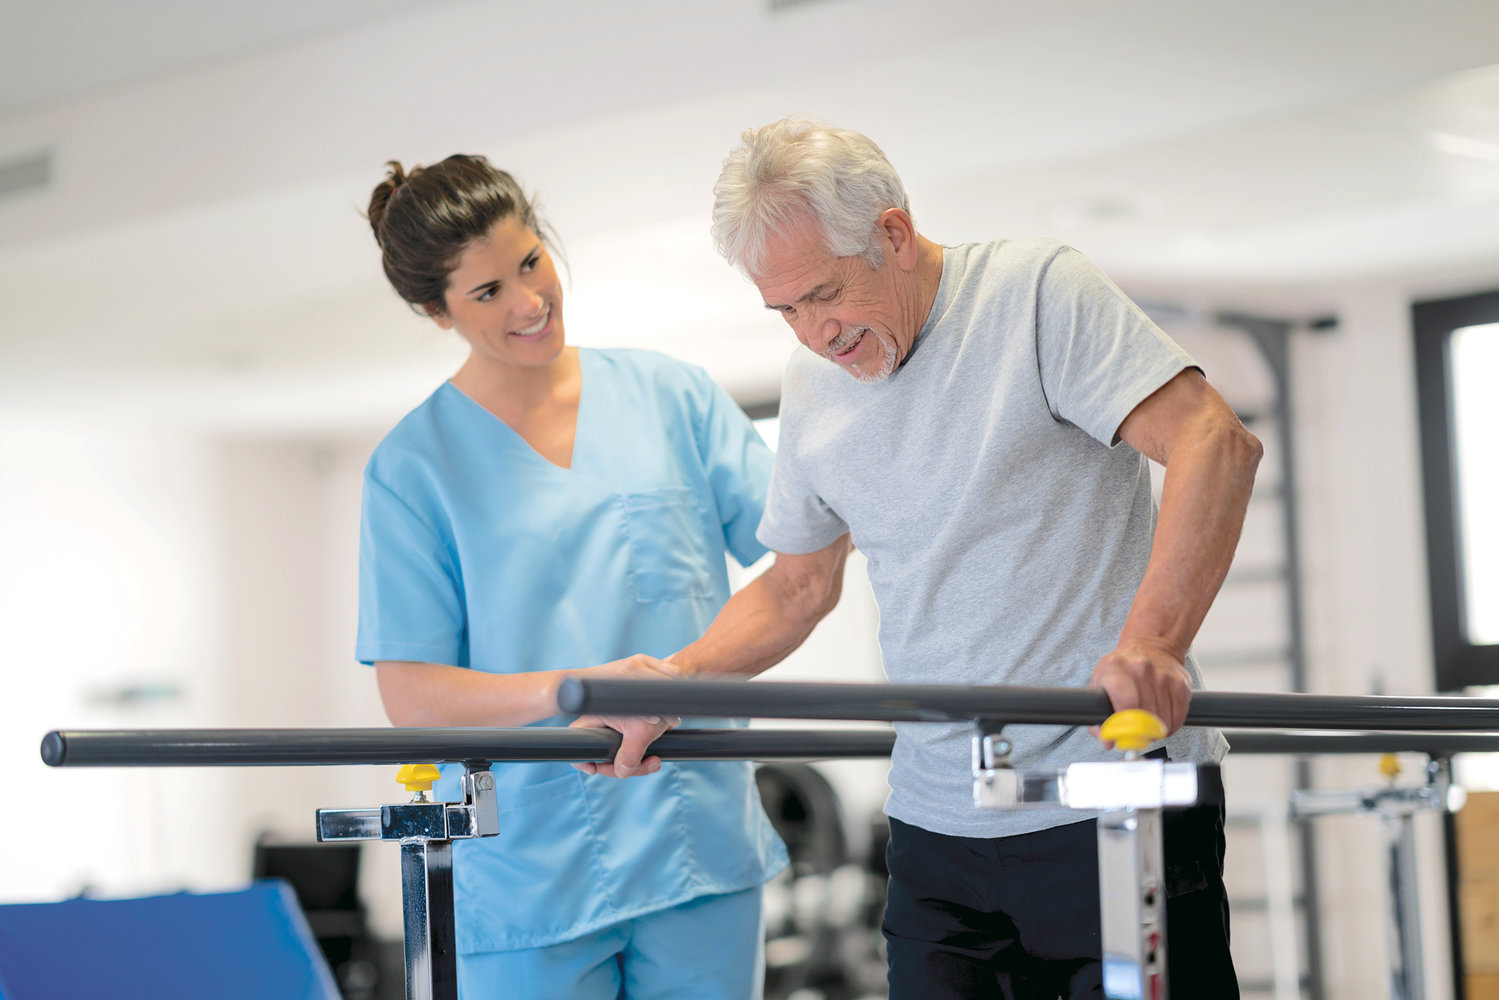 While each person’s stroke recovery journey is unique, starting the path toward rehabilitation as soon as it’s medically safe allows stroke survivors to mitigate the lasting effects.